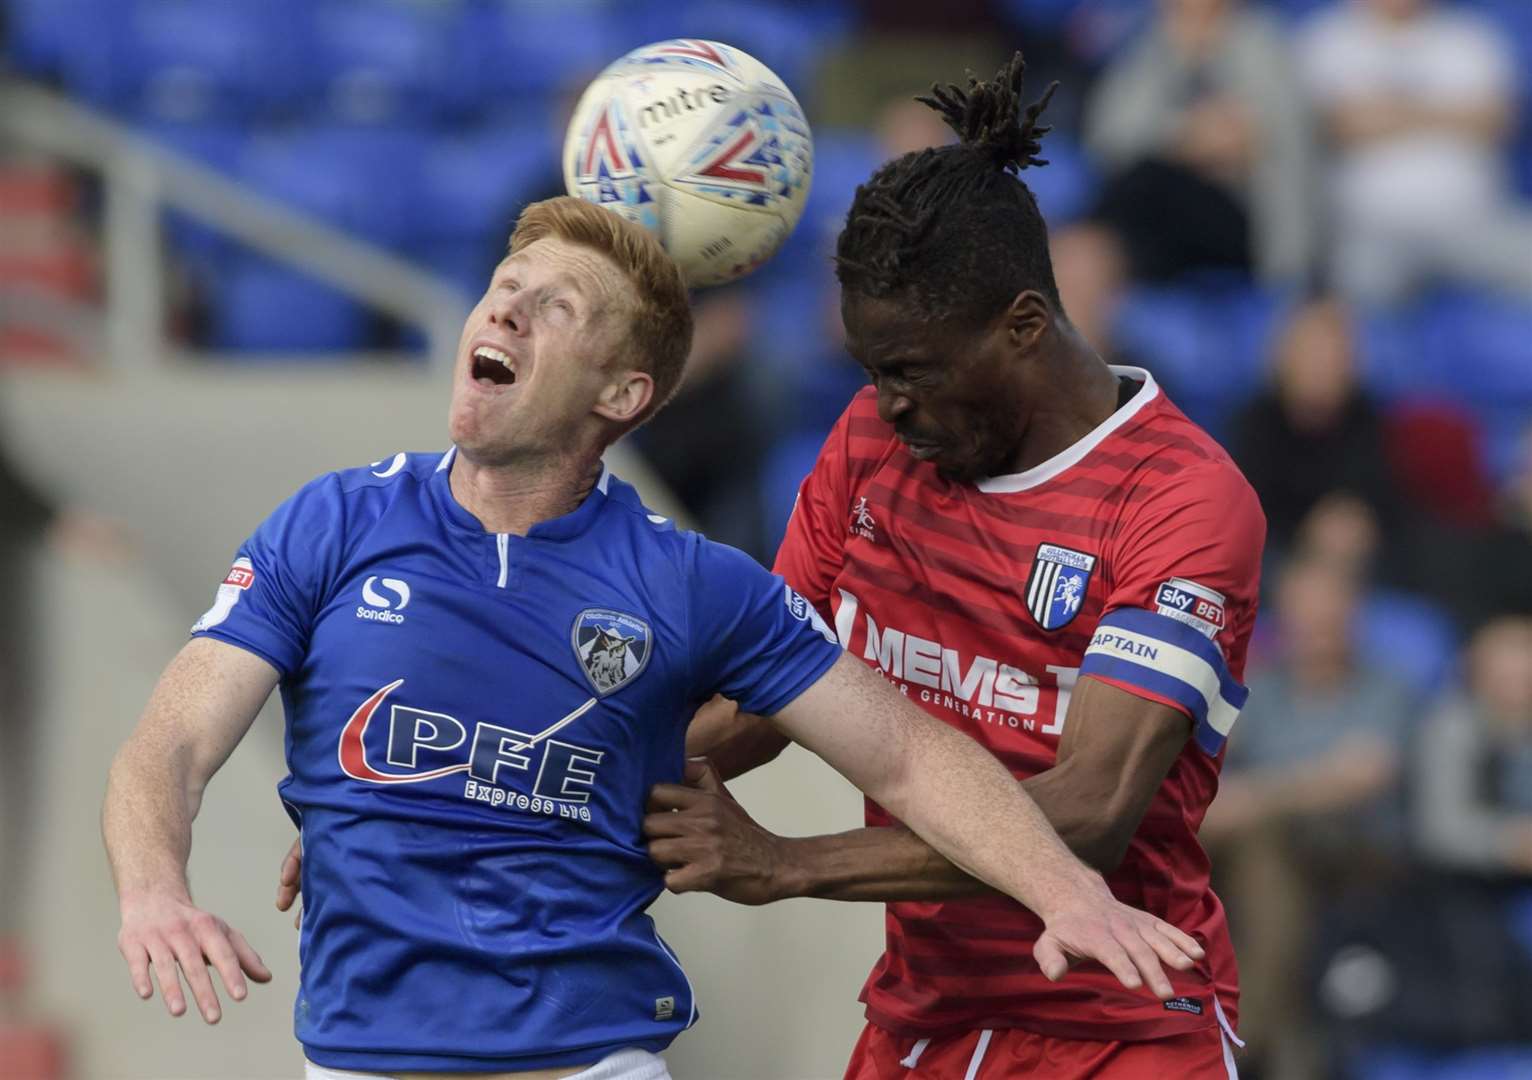 A typical aerial challenge in senior football as Eoin Doyle of Oldham and Gillingham's Gabriel Zakuani go head to head in 2018. Picture: Andy Payton